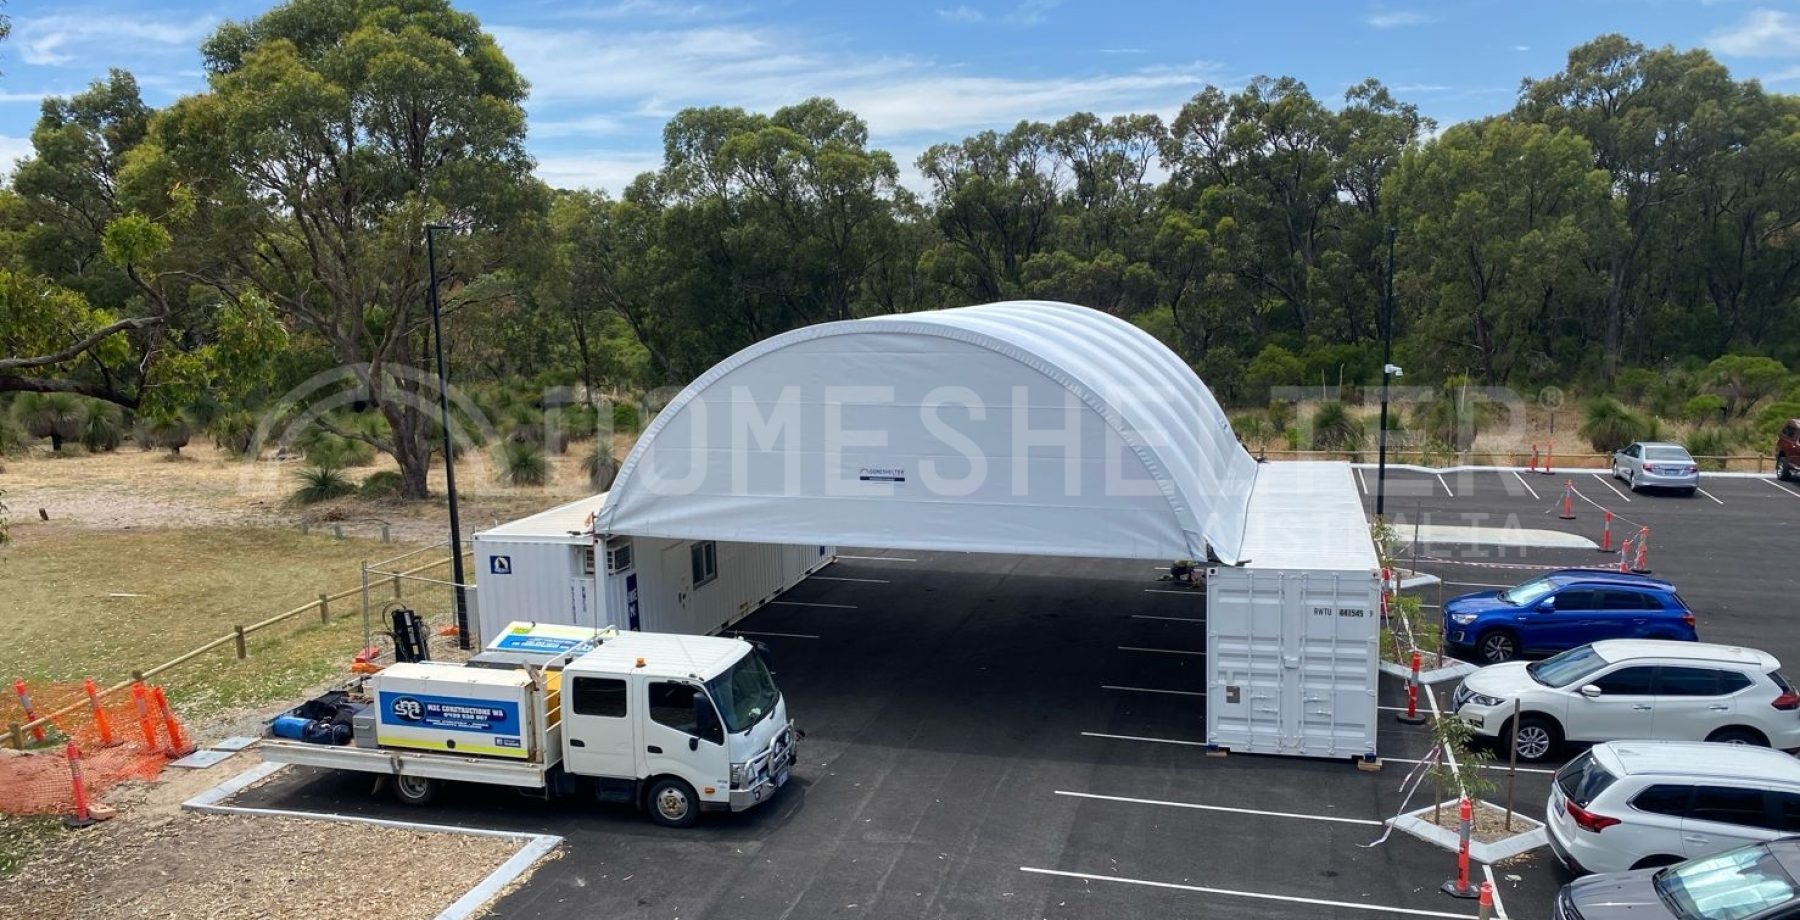 Covid drive through testing fabric shelter portable